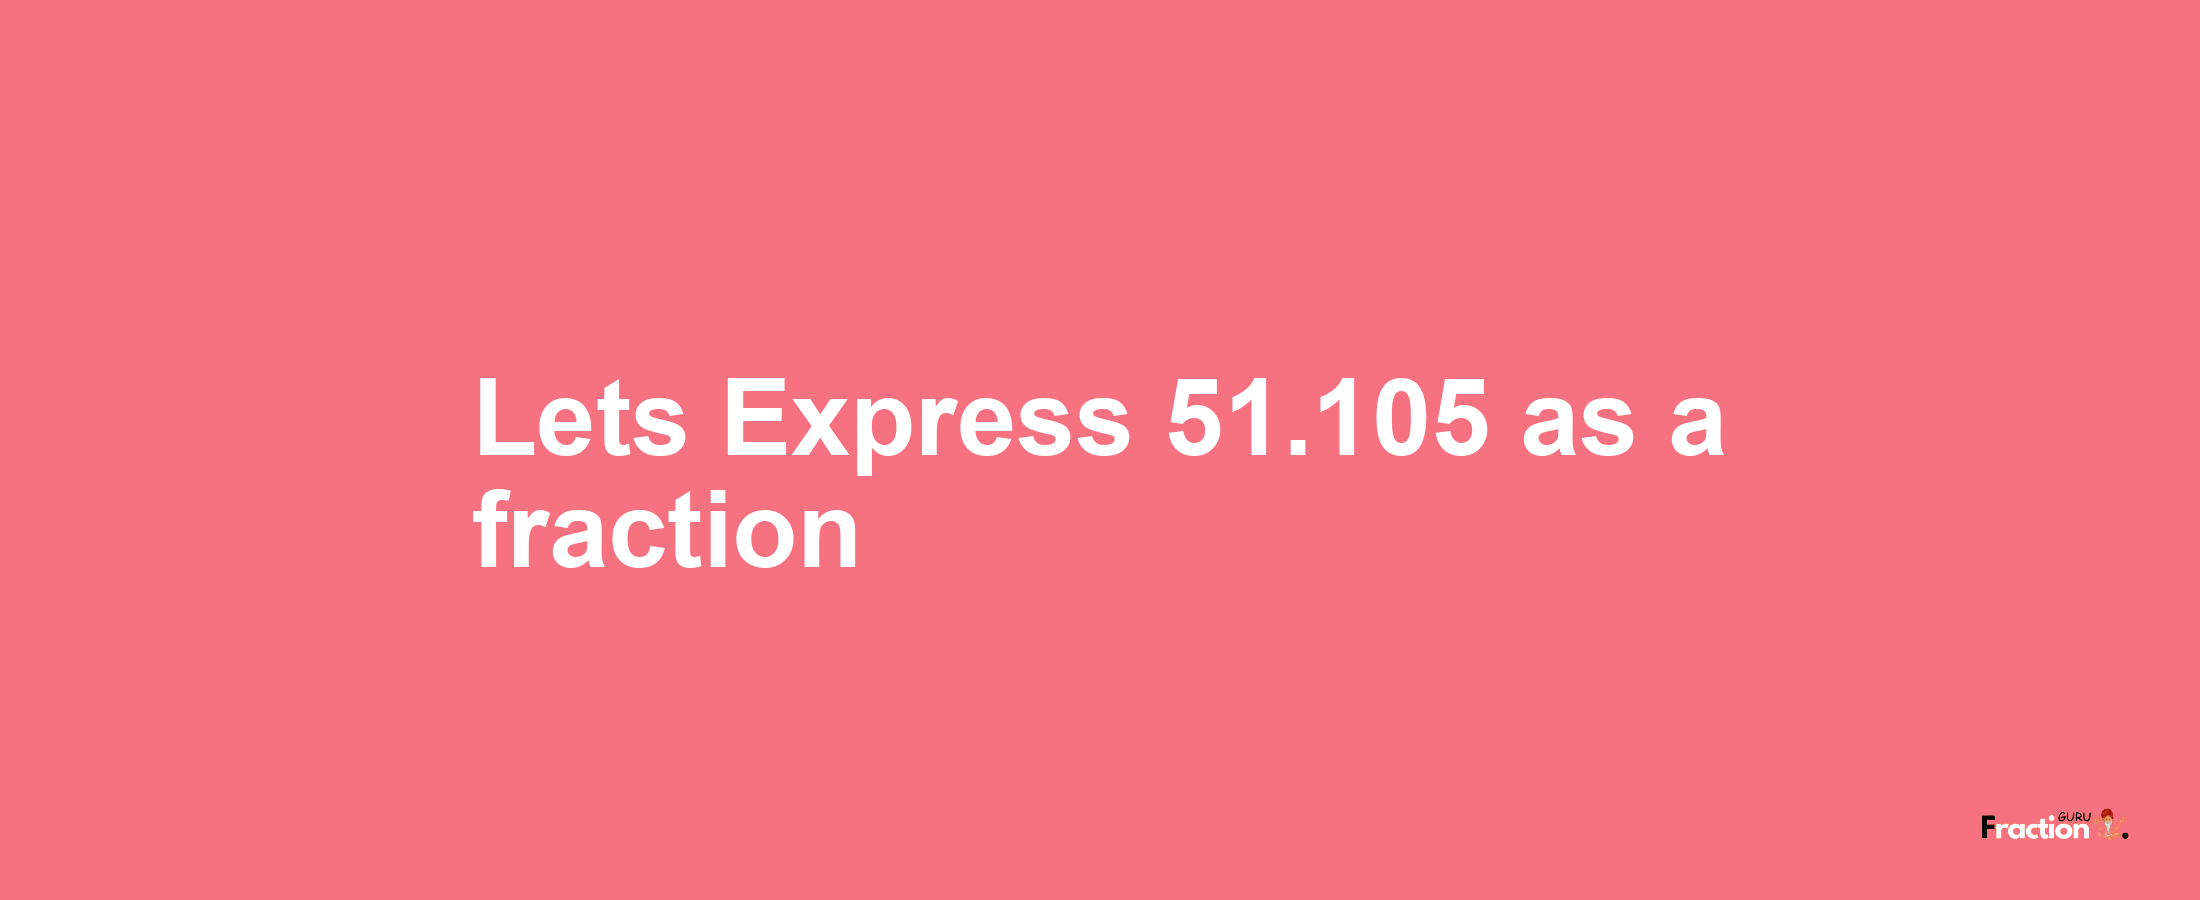 Lets Express 51.105 as afraction